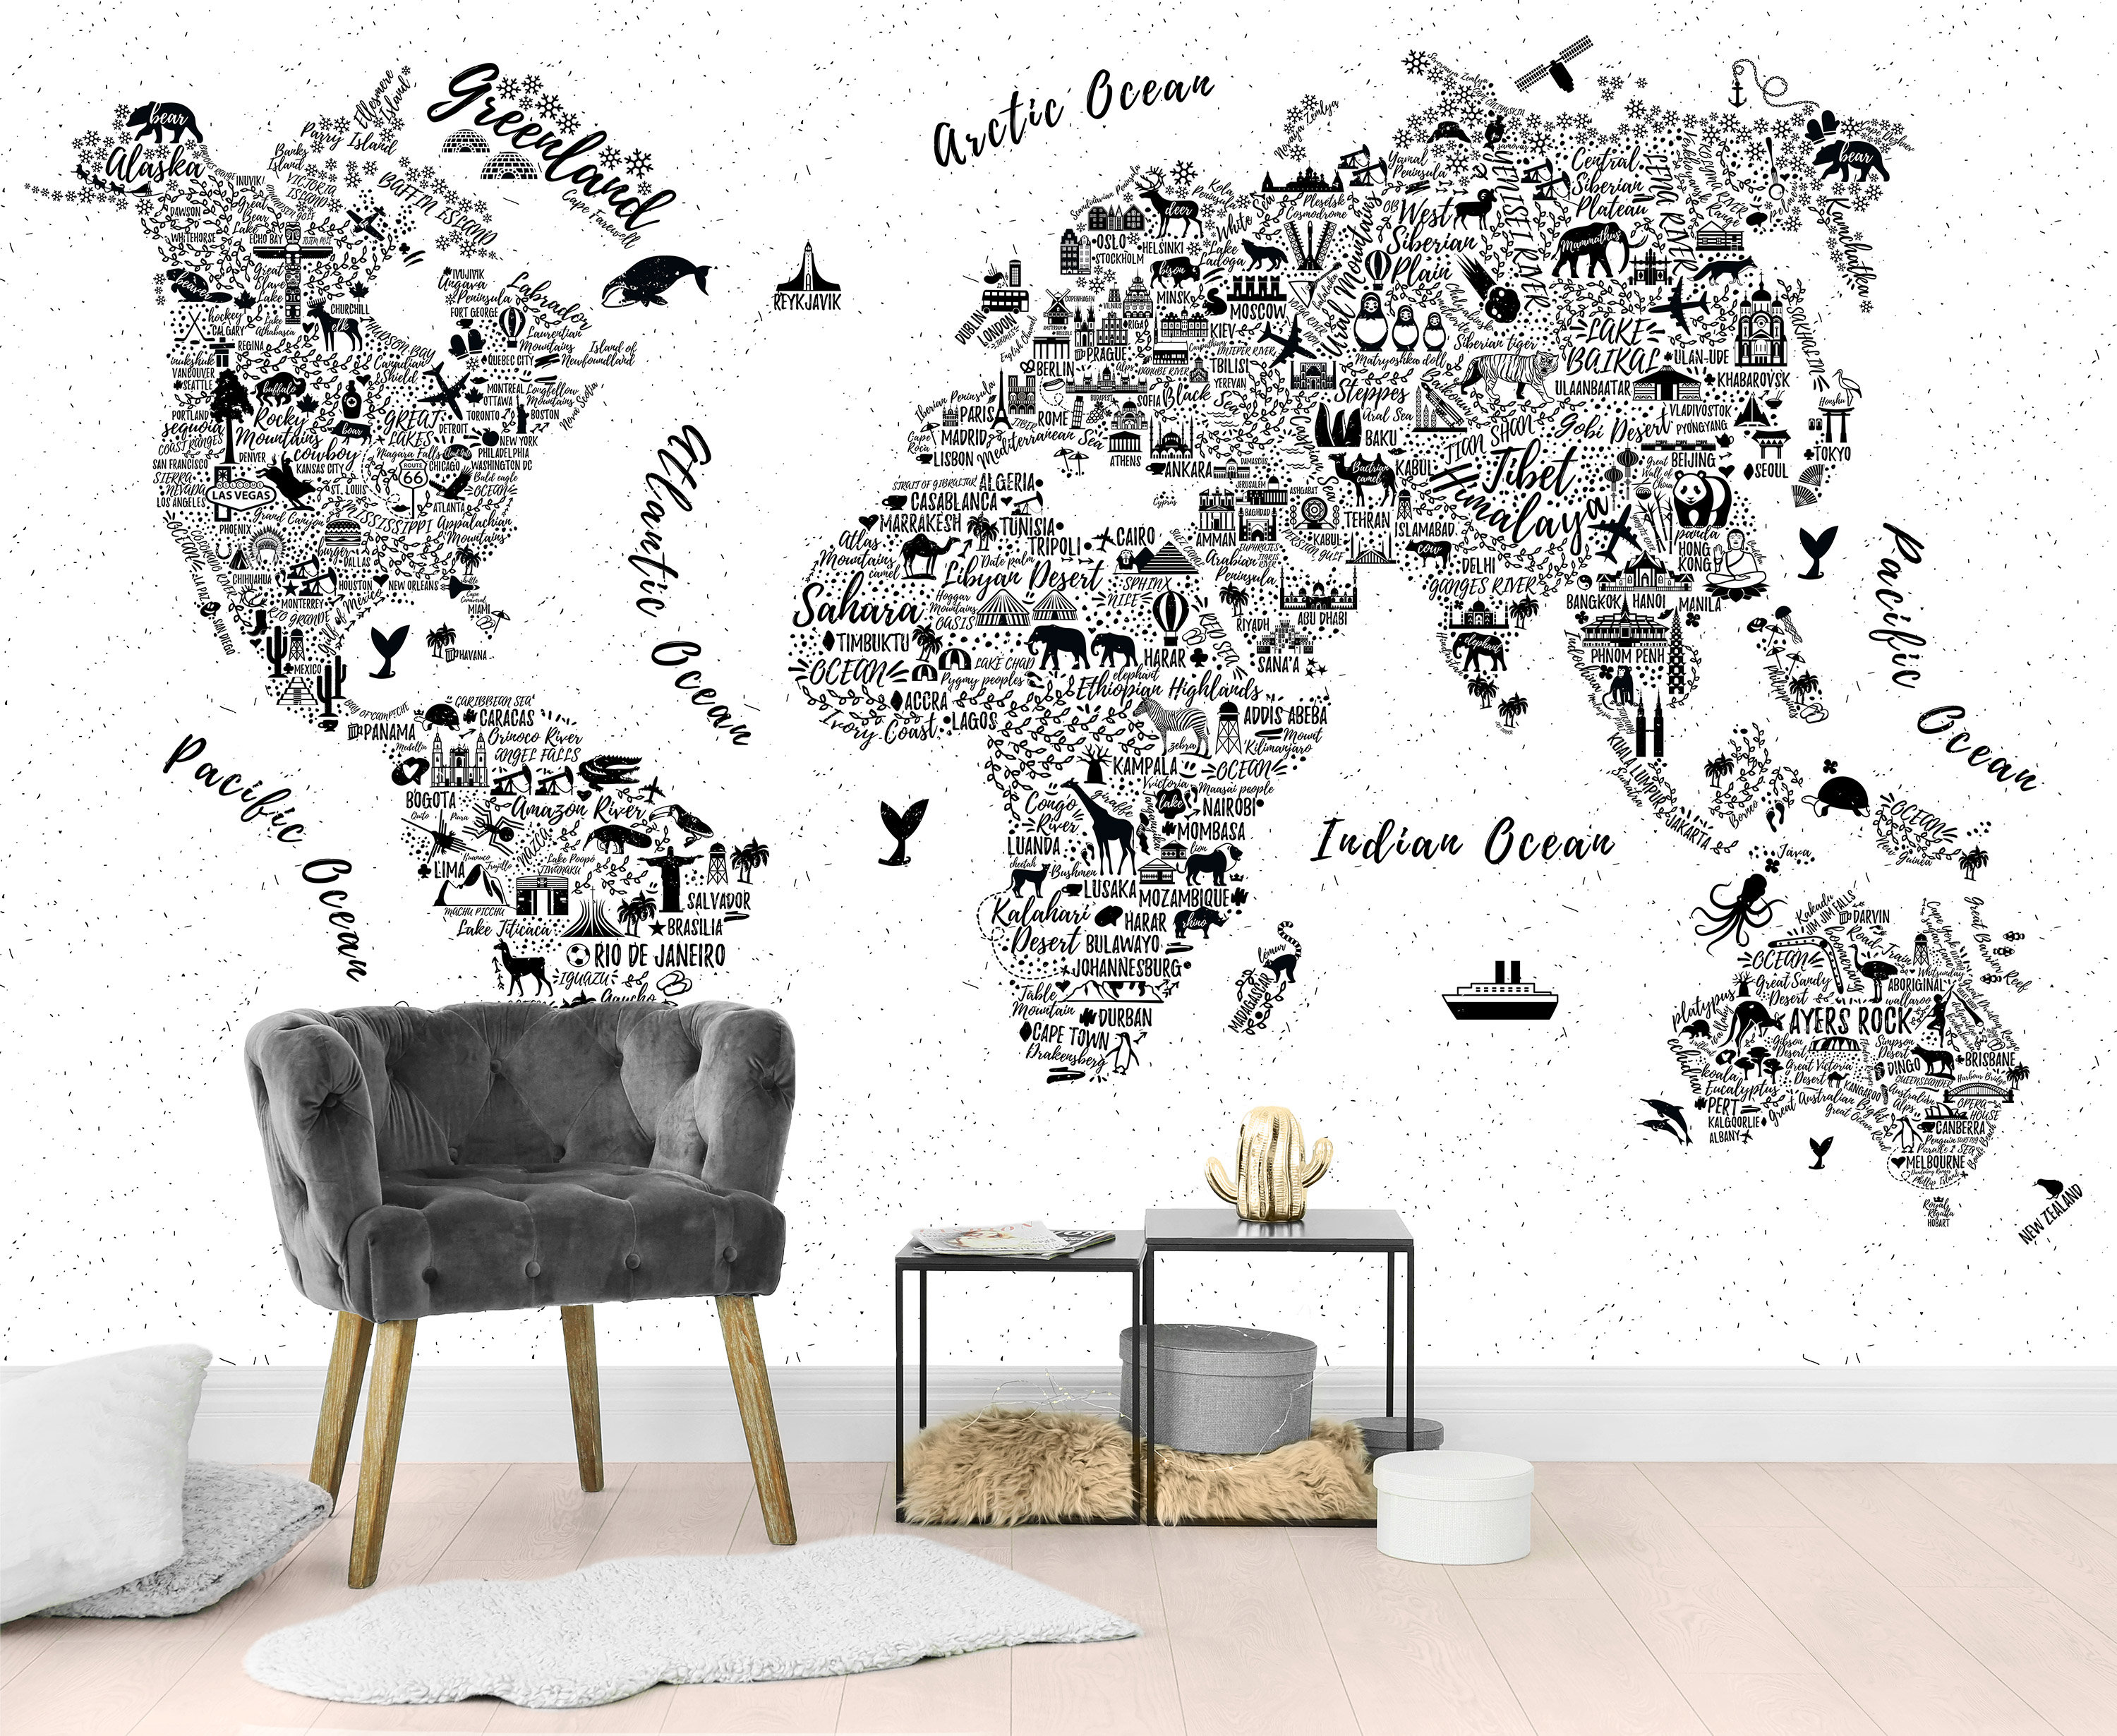 World Maps: World Map on Globe Mural - Removable Wall Adhesive Wall Decal Large